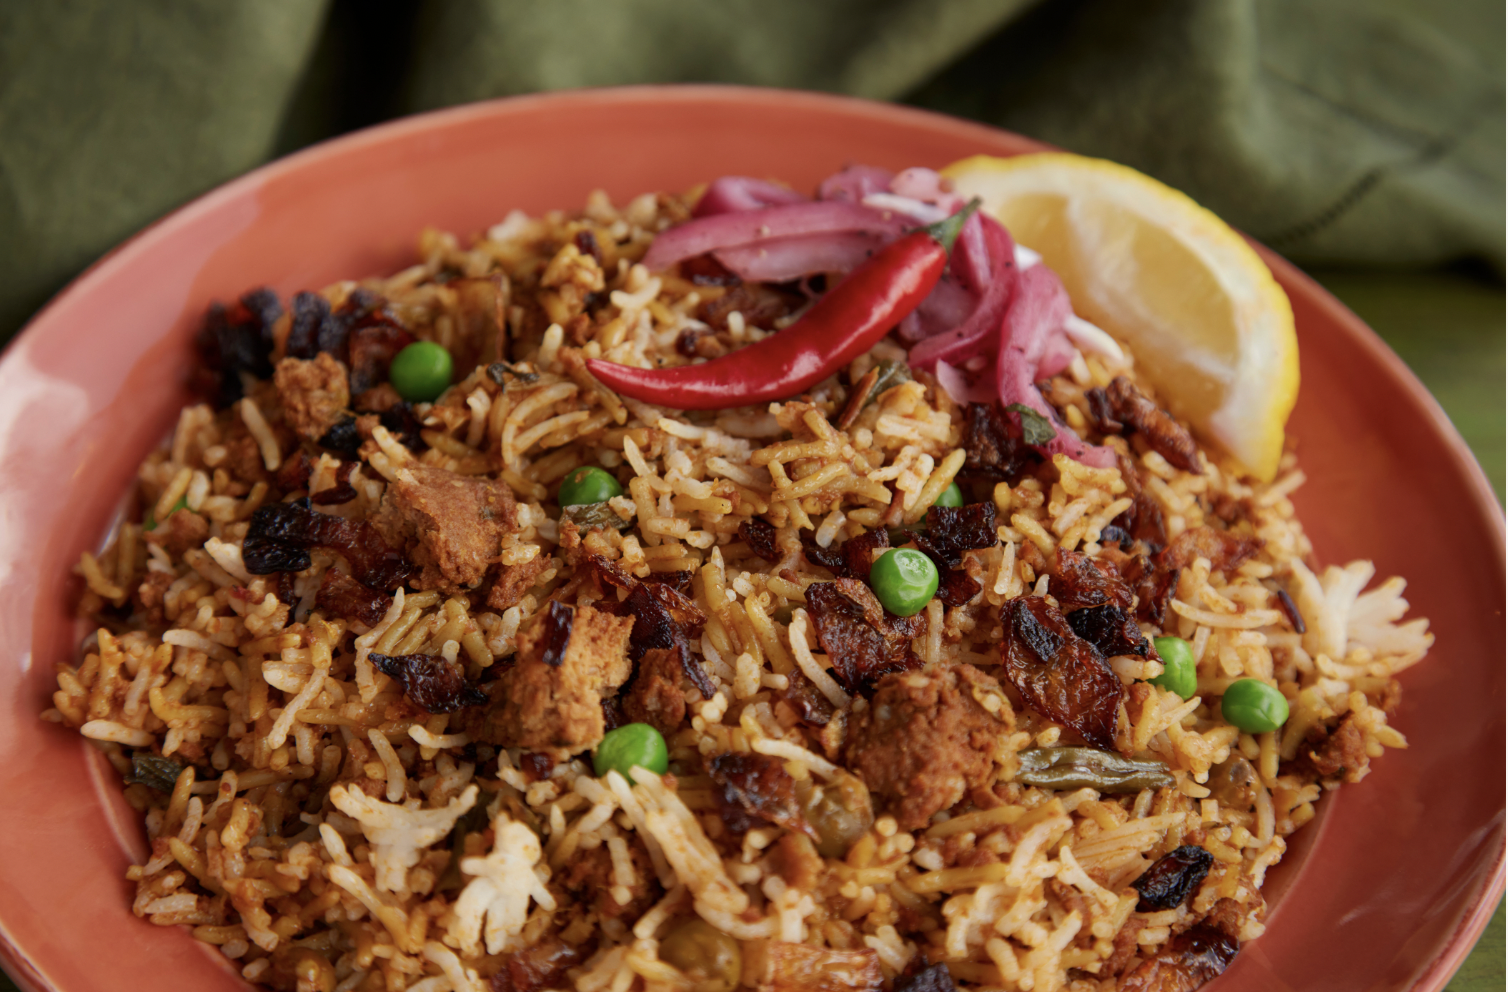 Lamb Biryani - - Boneless marinated lamb simmered in a mixture of spices and aromatics until tender.  Cooked with long grain basmati spiced rice. Garnished with fresh lemon, Thai chili pepper, fried and pickled onions.
- Gluten & Dairy Free